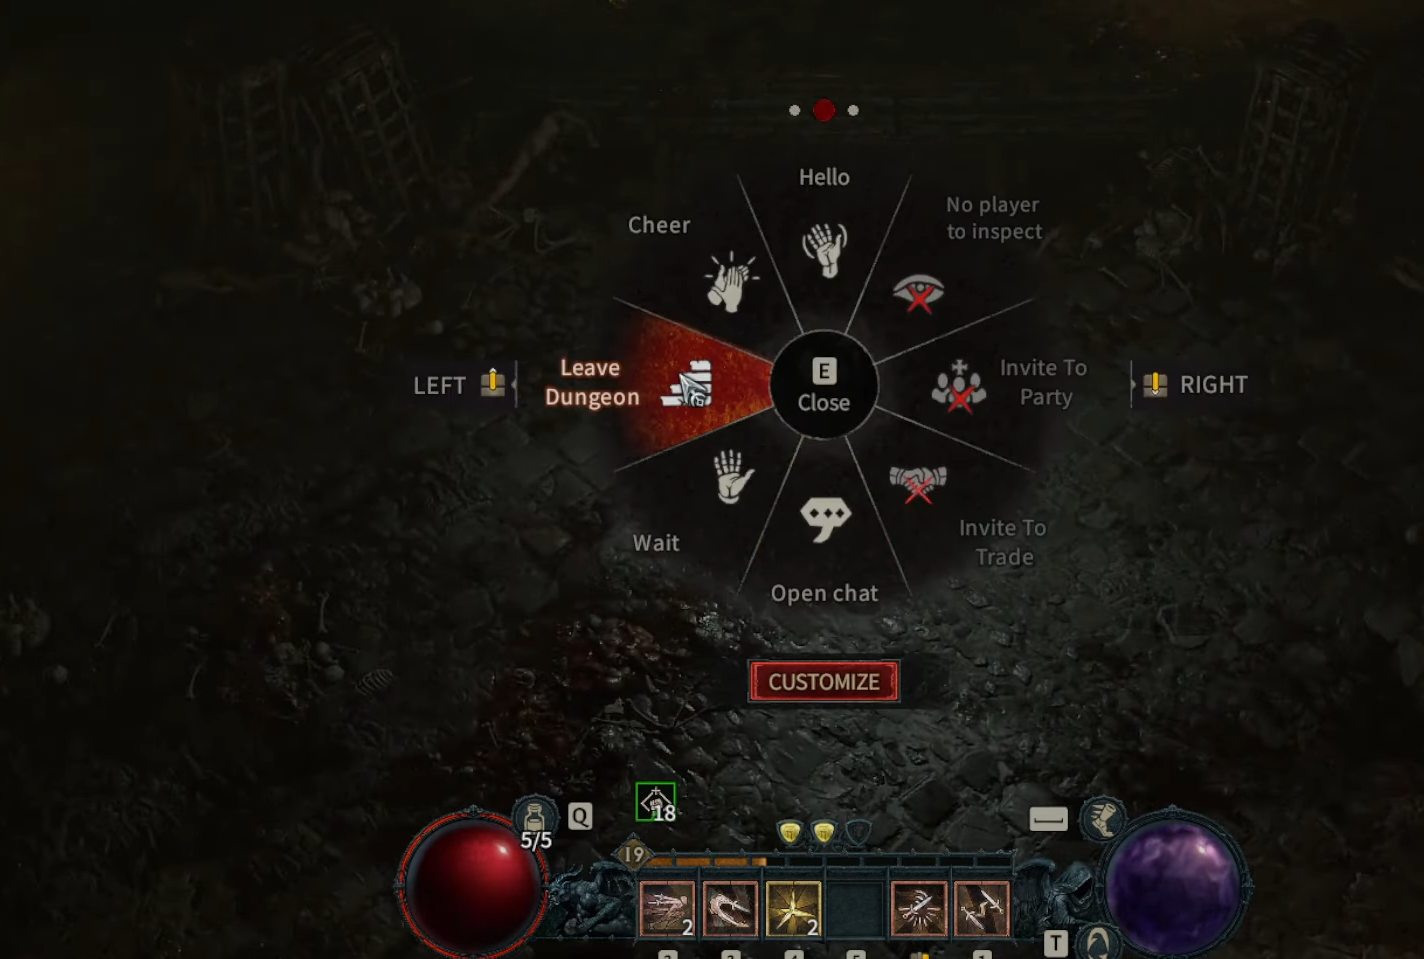 Leave dungeon option in action wheel Diablo 4